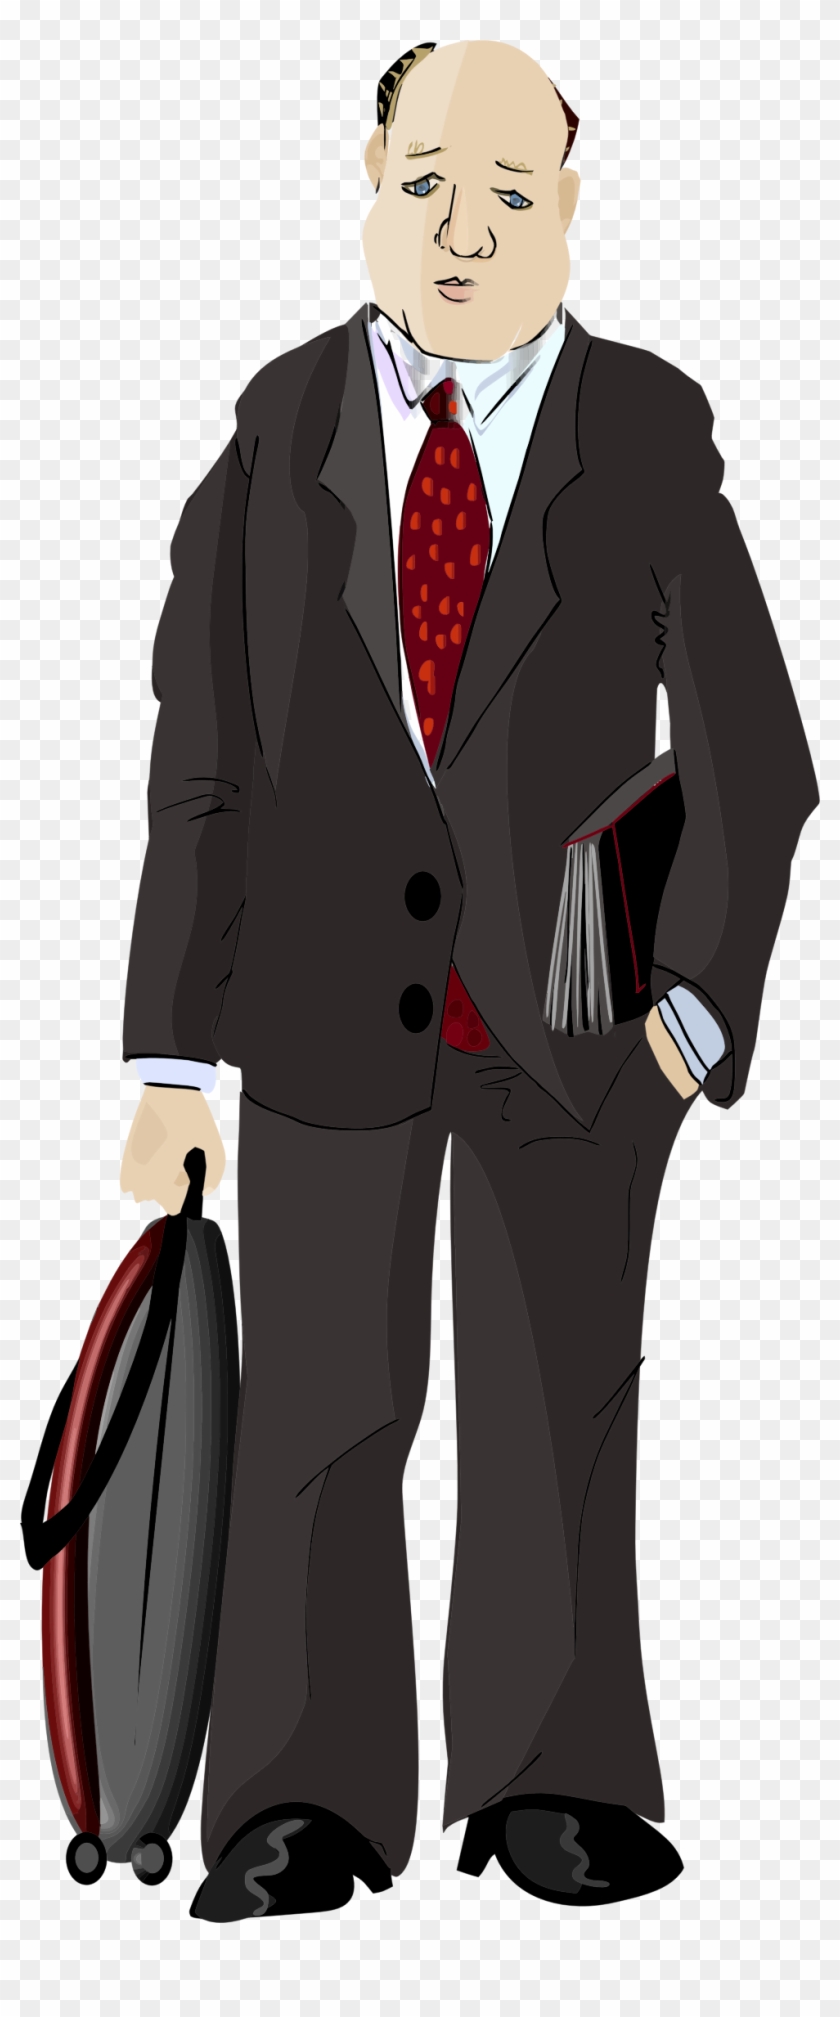 This Free Icons Png Design Of Traveling Businessman Clipart #325100